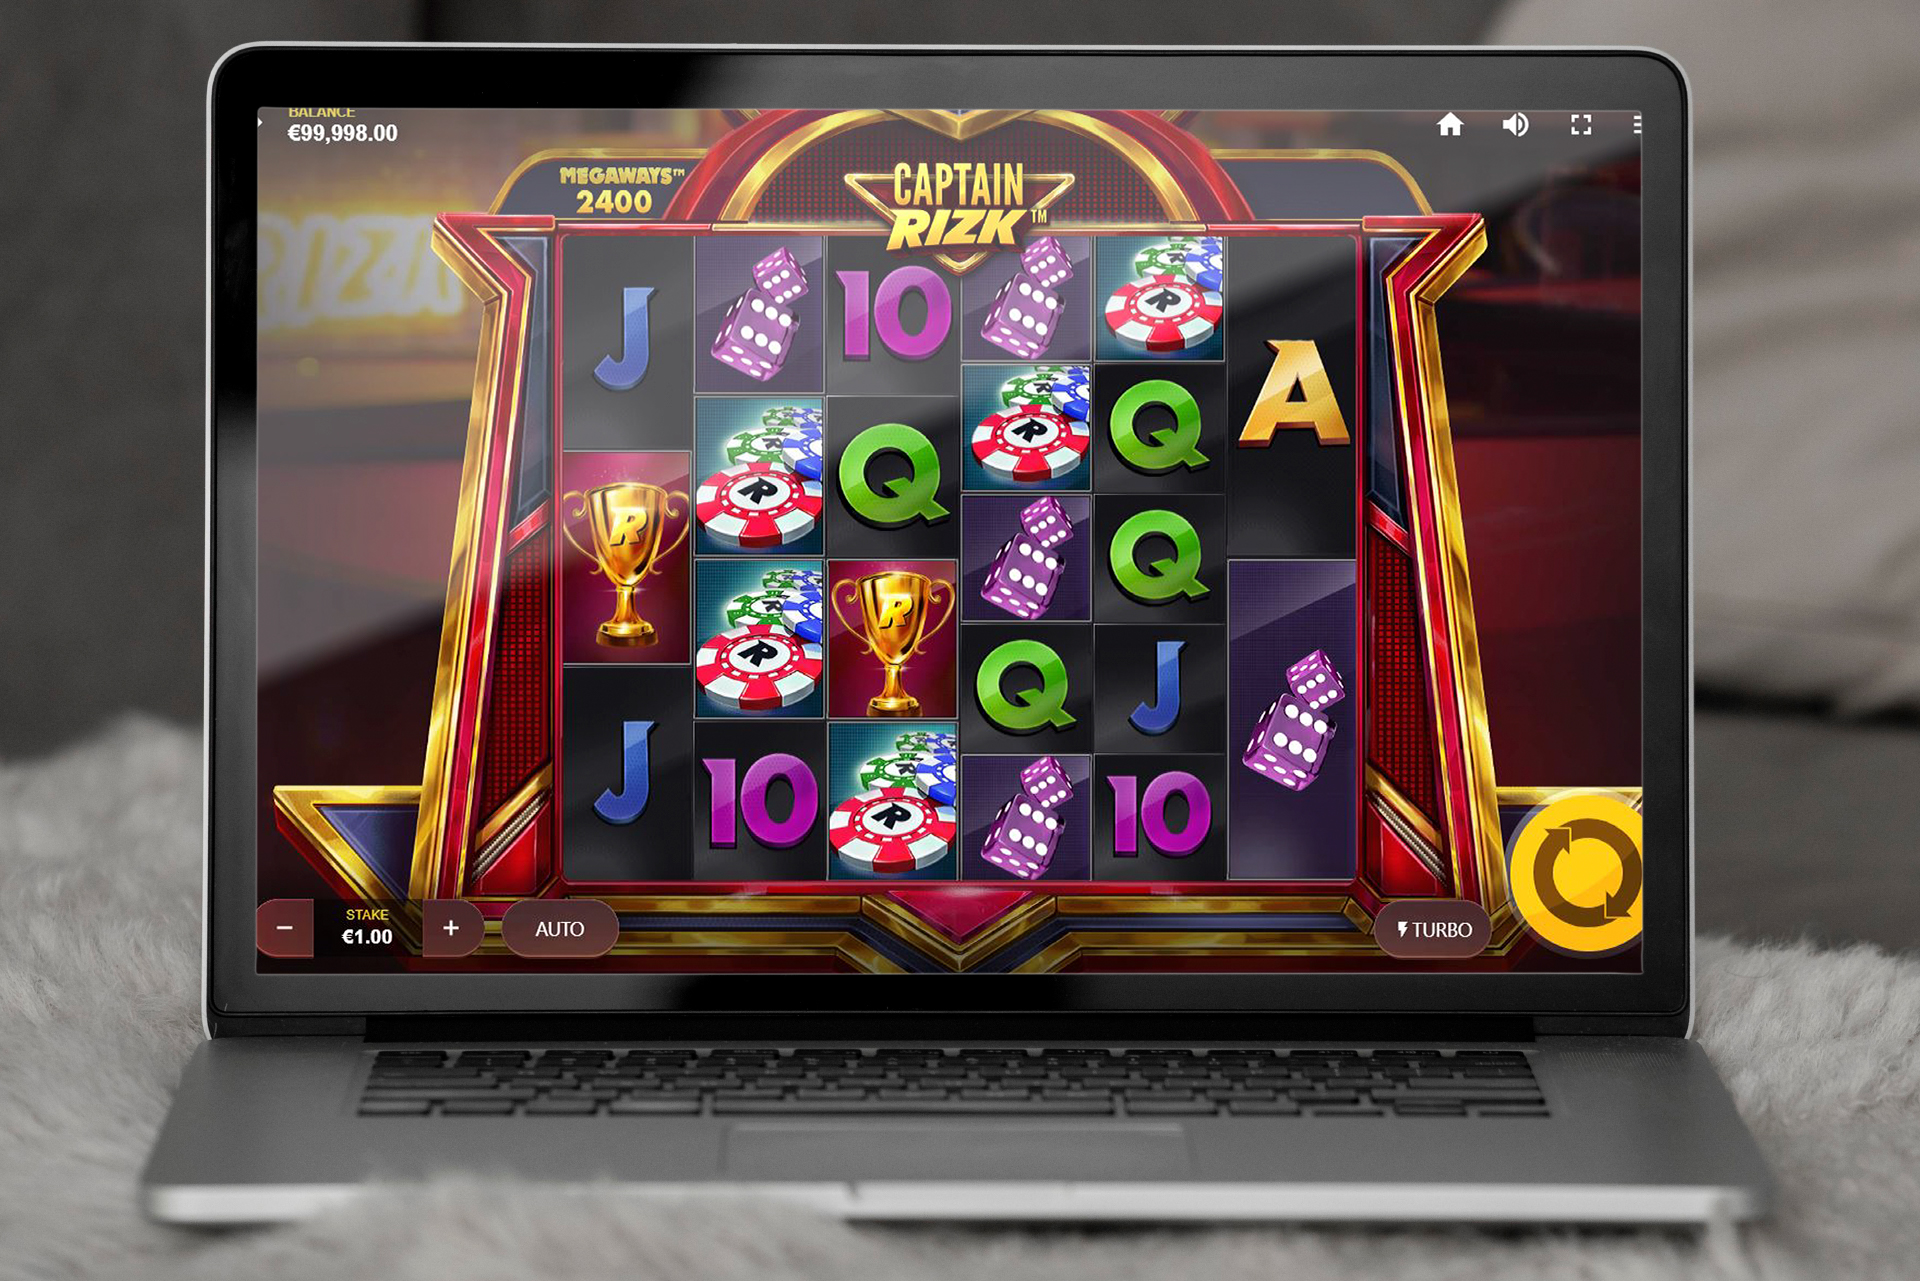 There are lots of bright and exciting slot games at Rizk Casino.